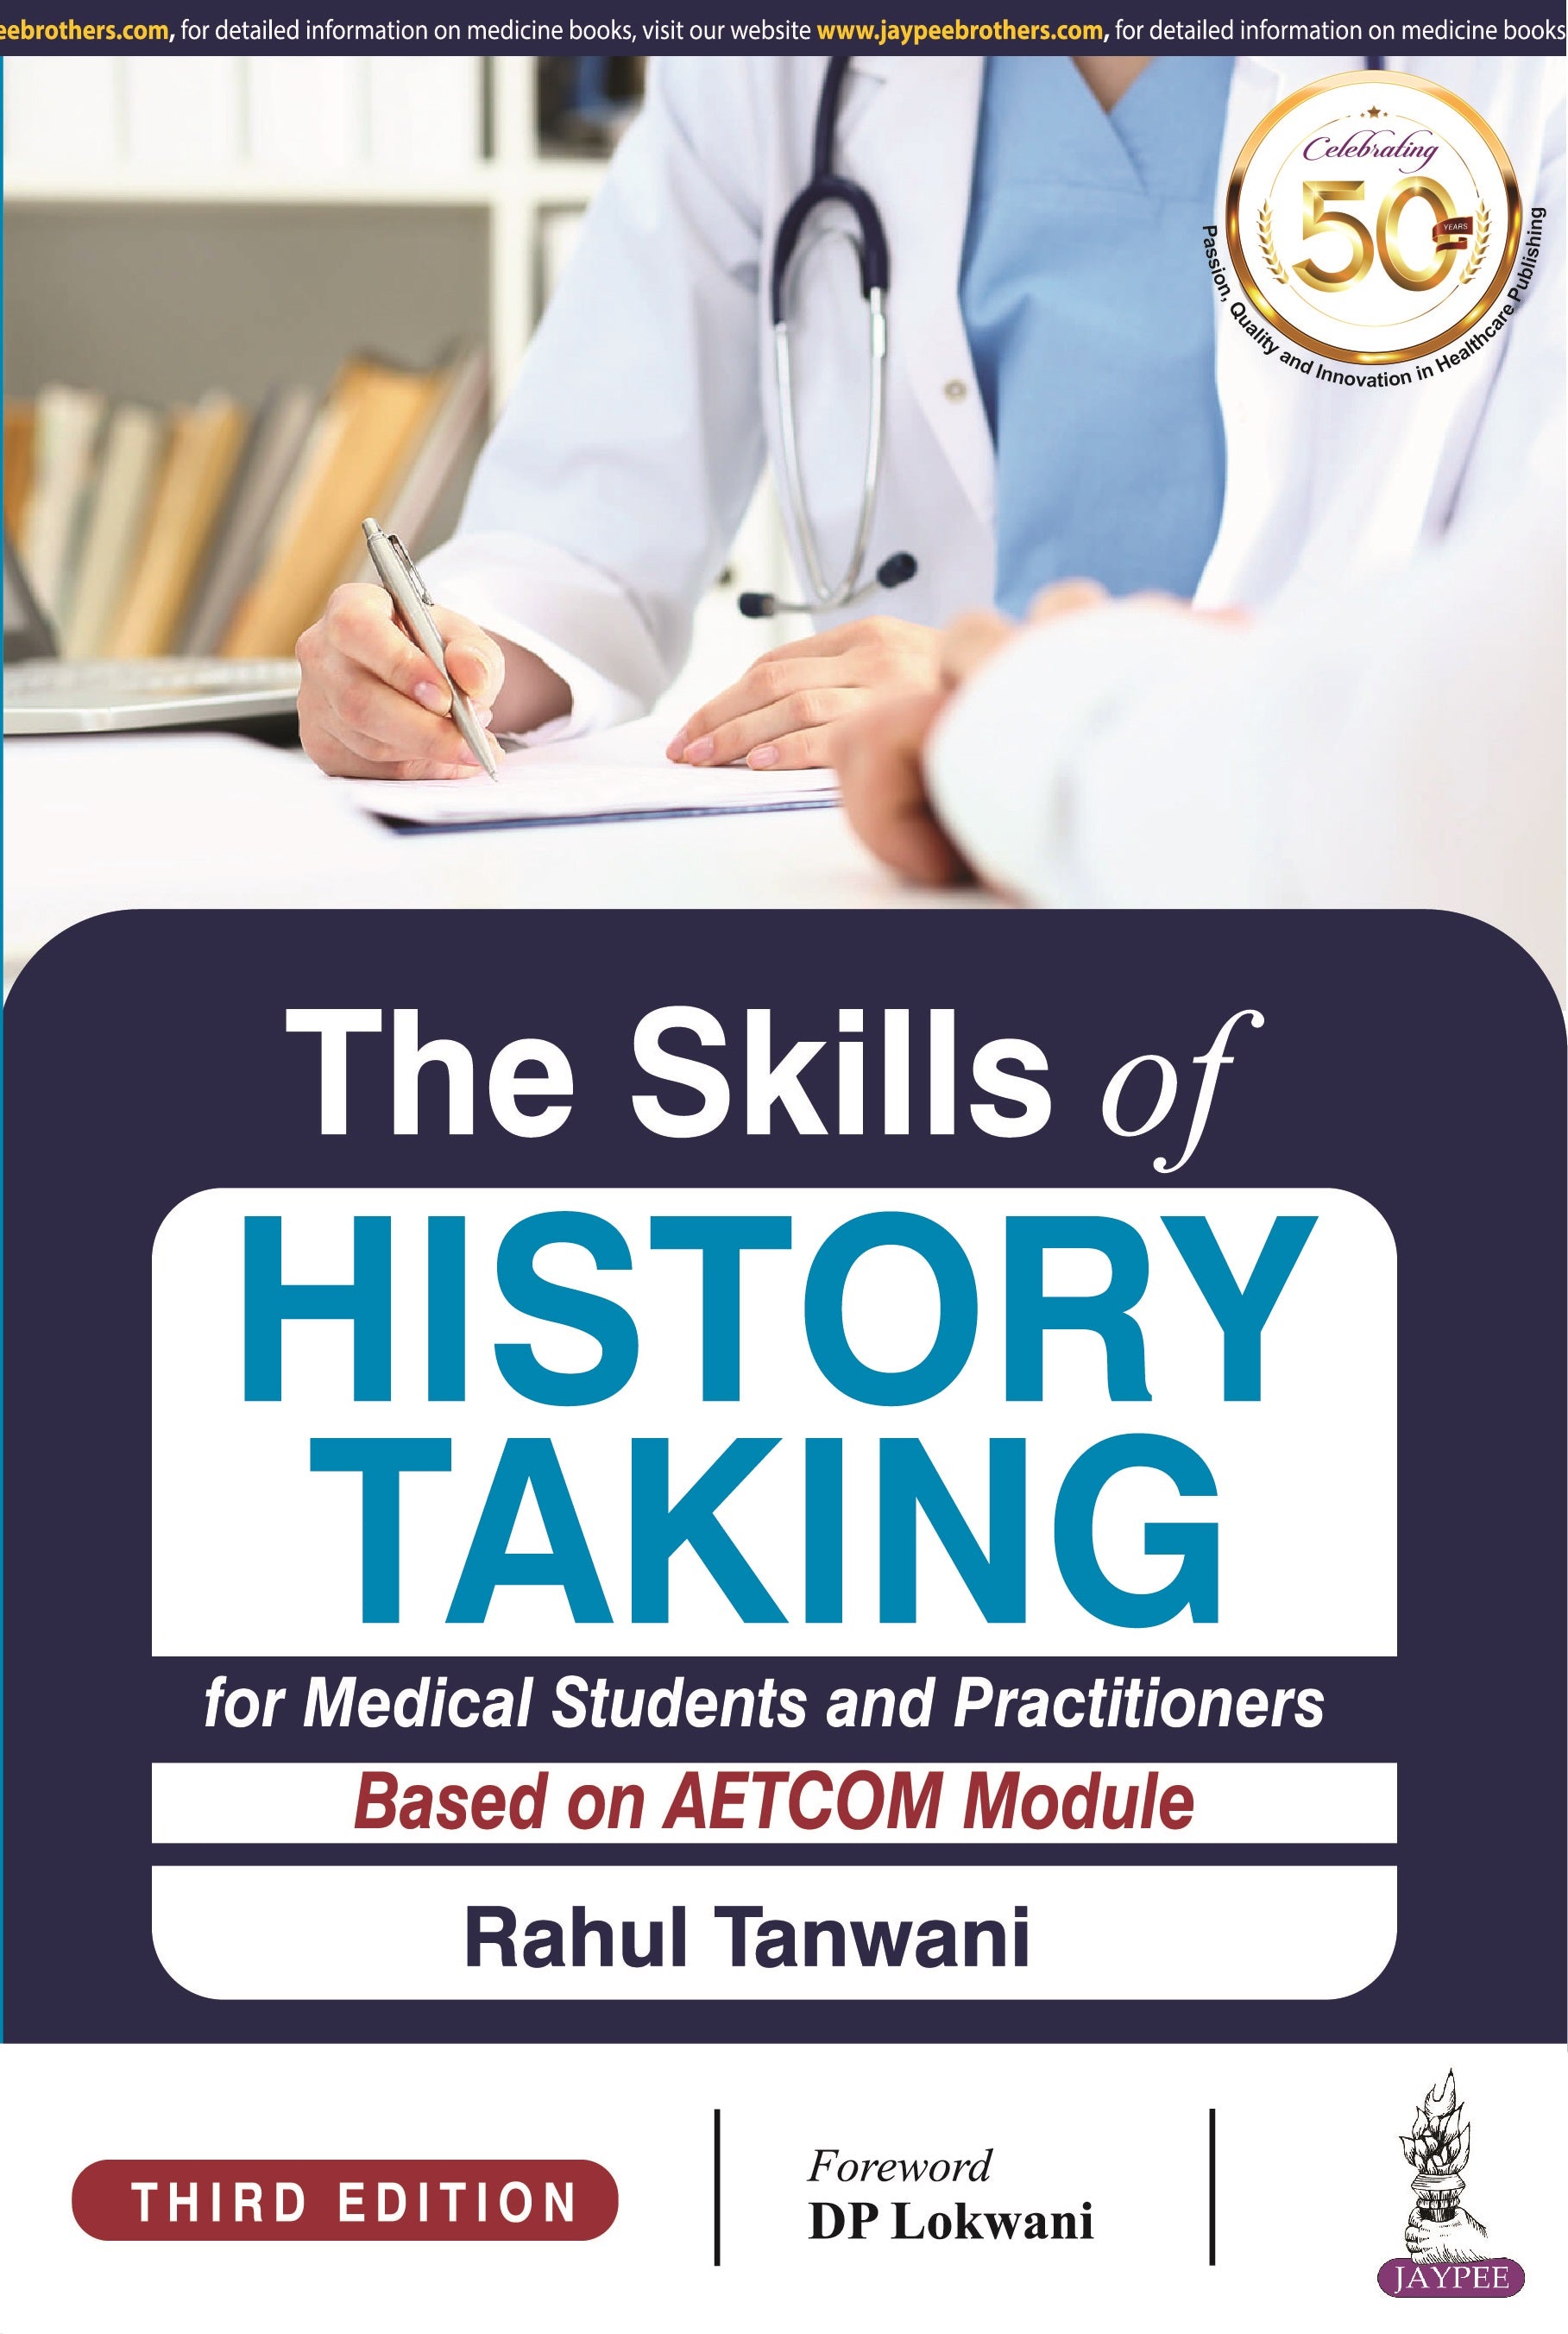 THE SKILLS OF HISTORY TAKING FOR MEDICAL STUDENTS AND PRACTITIONERS BASED ON AETCOM MODULE,3/E,RAHUL TANWANI